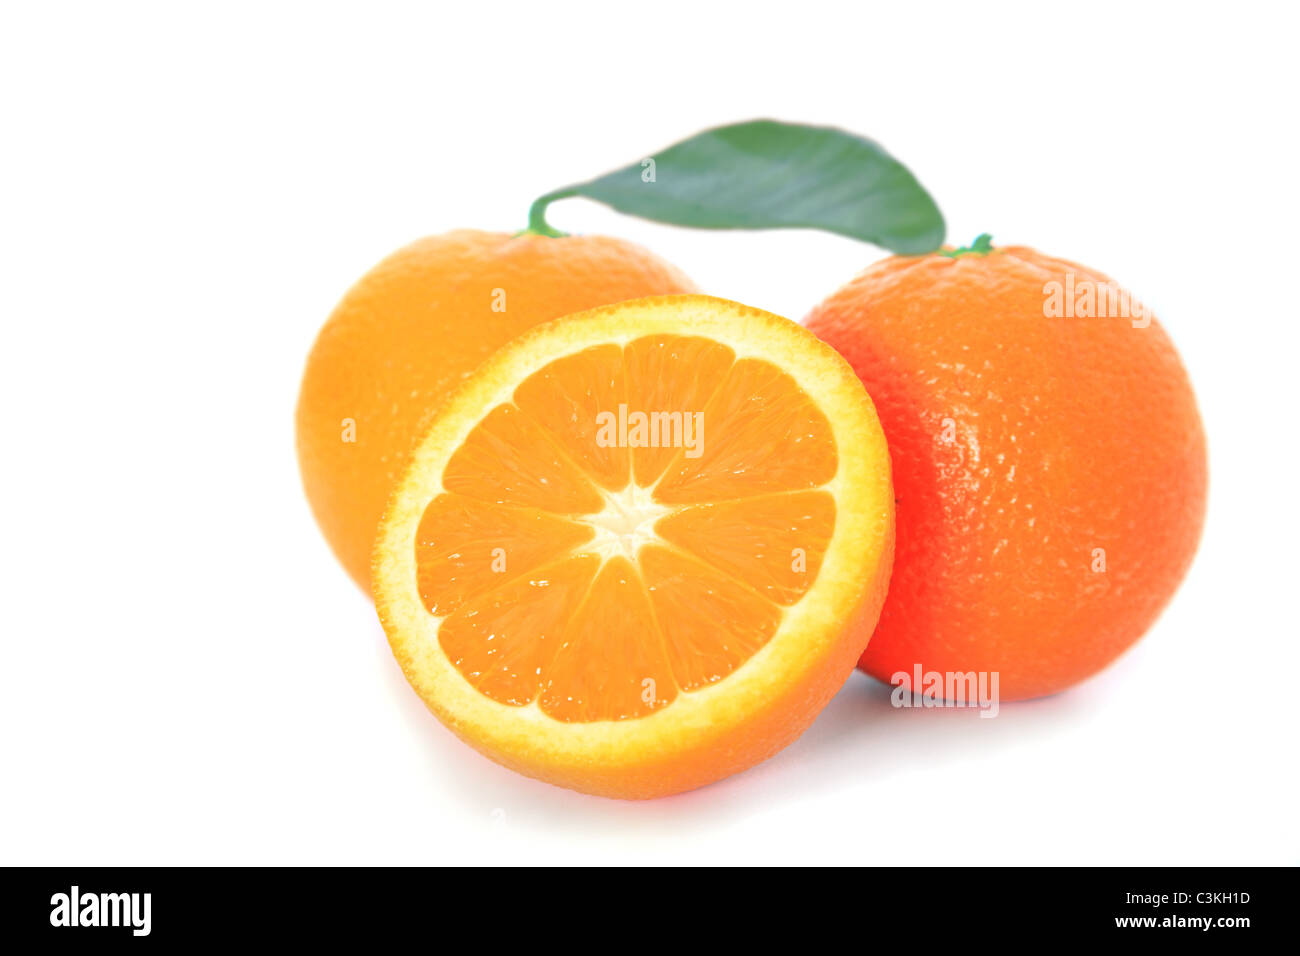 The juicy ripe oranges. All on white background. Stock Photo